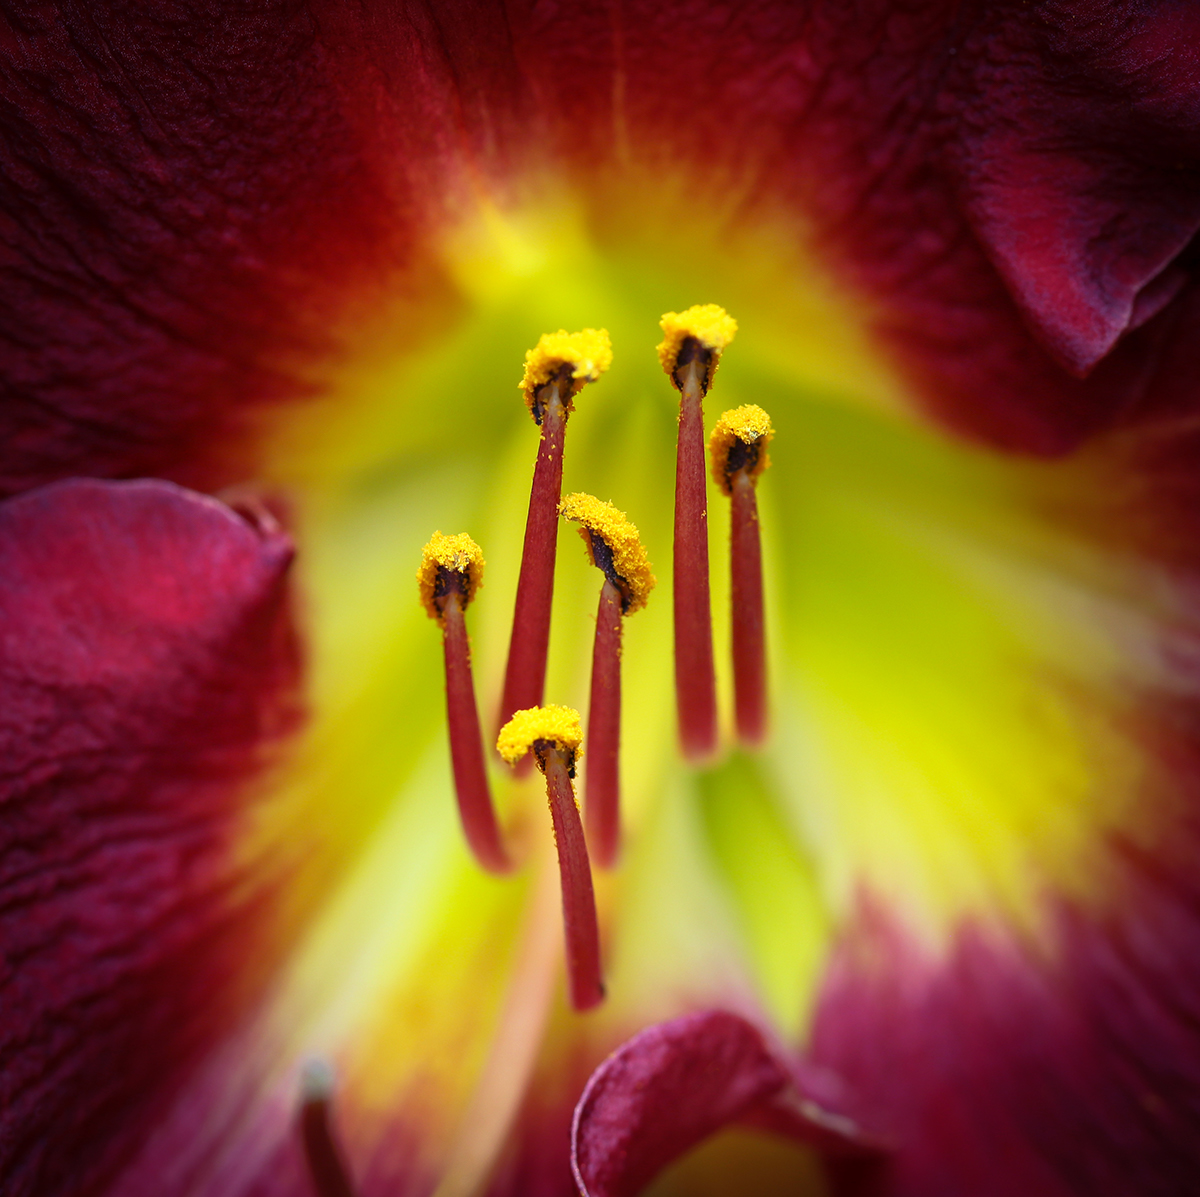 Flowers floral macro lily stamens filaments close-up